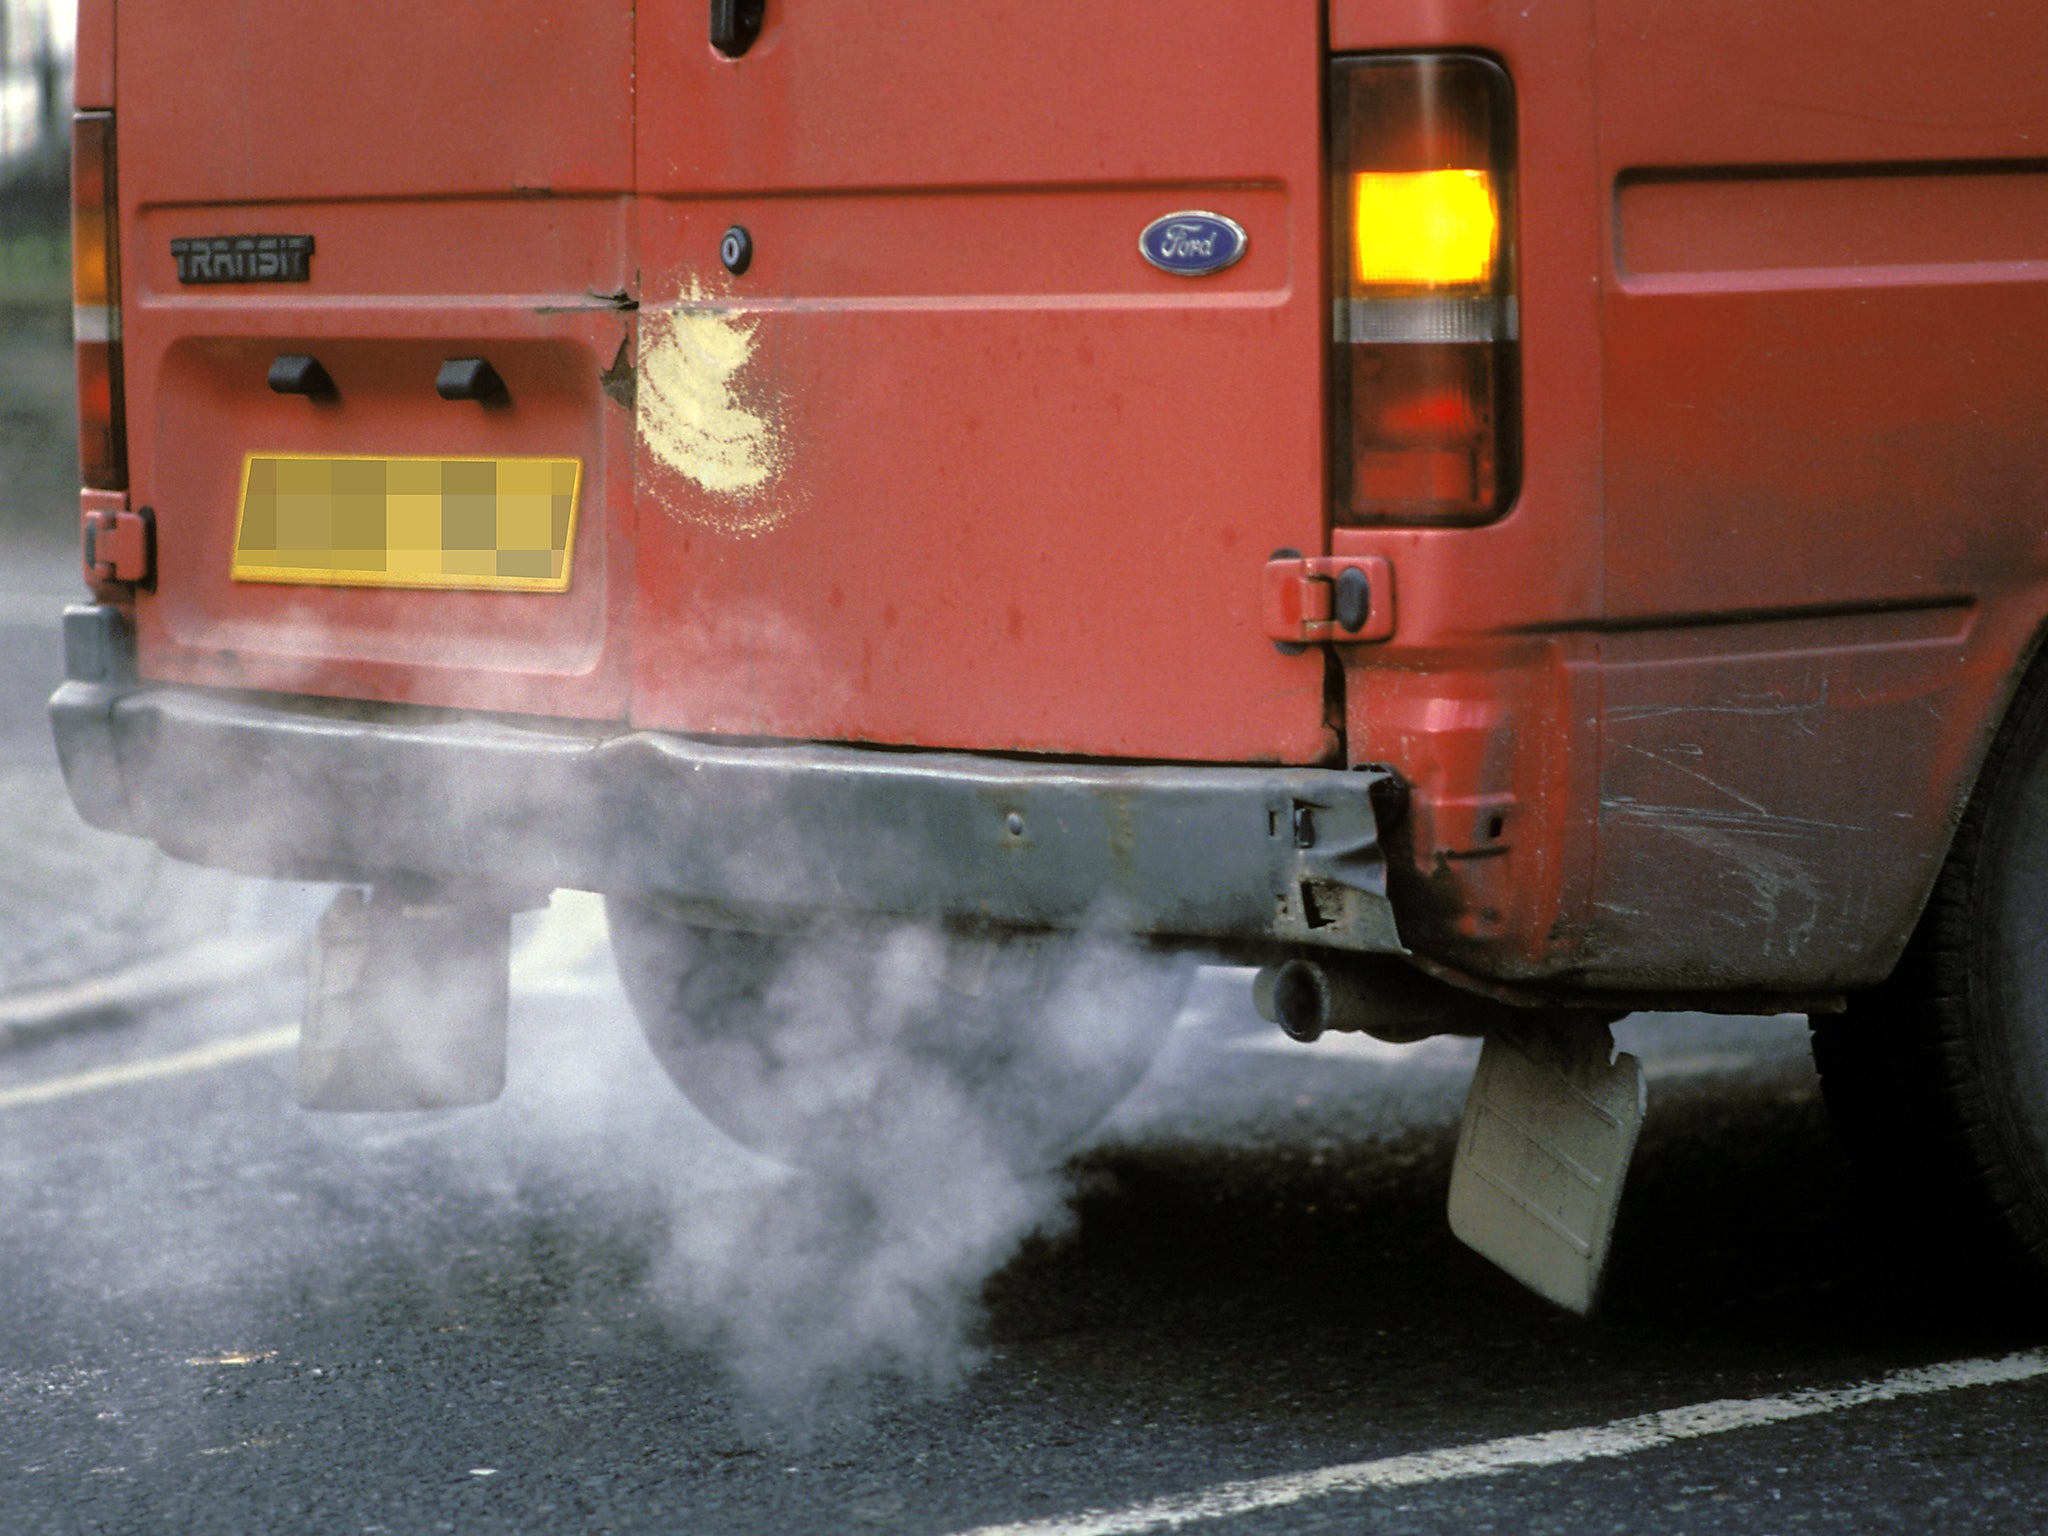 A majority of the public is now in favour of banning the most-polluting vehicles from city centres, a new survey finds